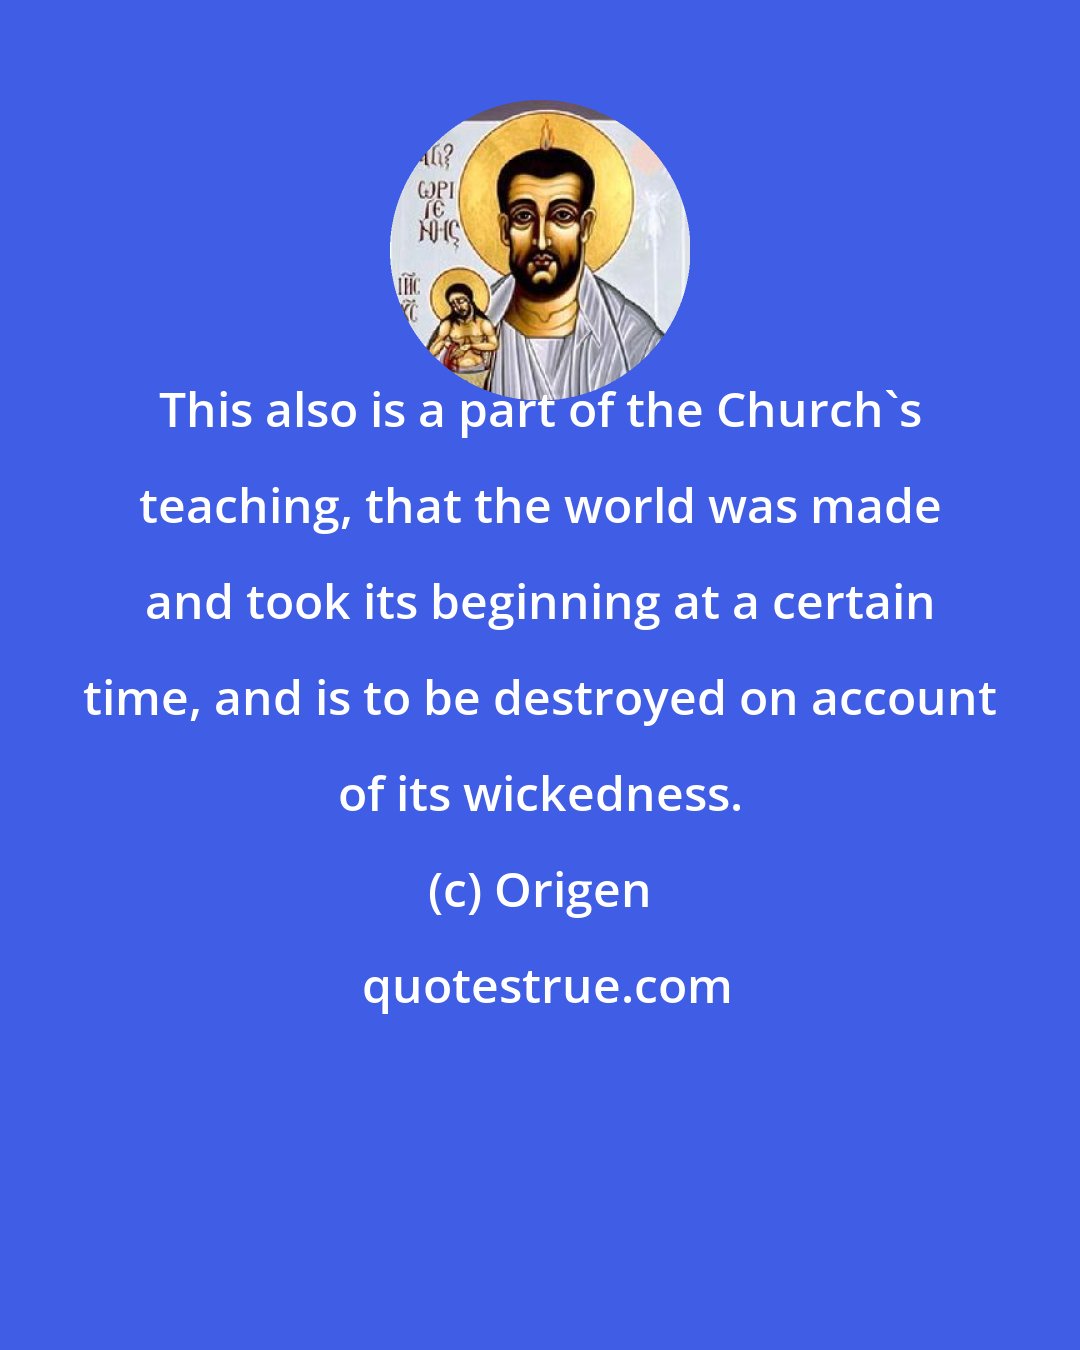 Origen: This also is a part of the Church's teaching, that the world was made and took its beginning at a certain time, and is to be destroyed on account of its wickedness.